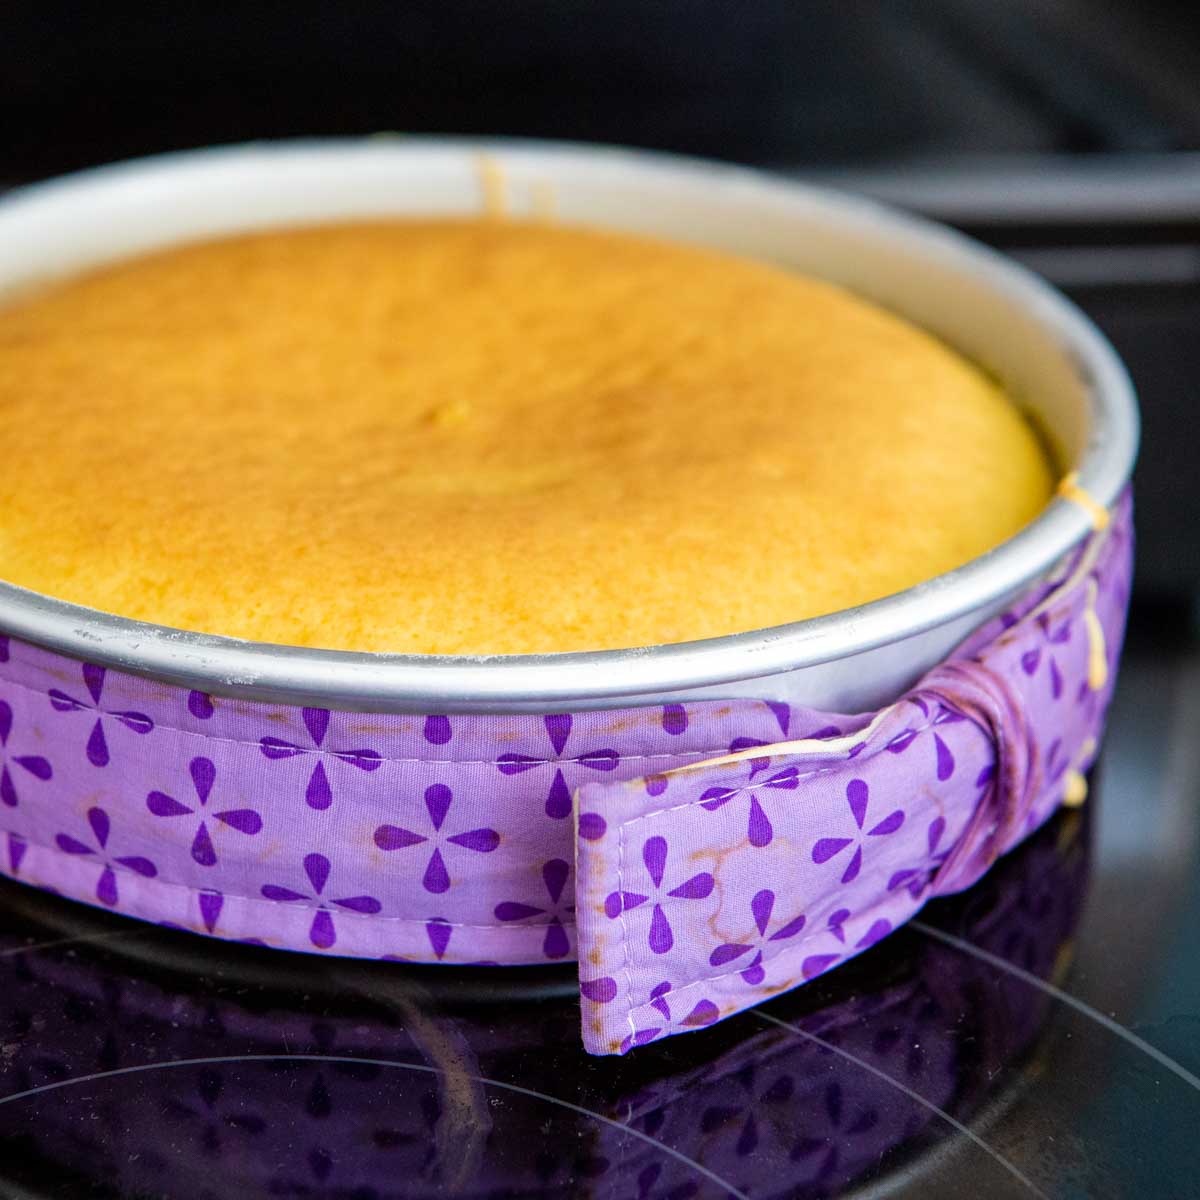 Best Cake Tin: Level Up Your Home Baking